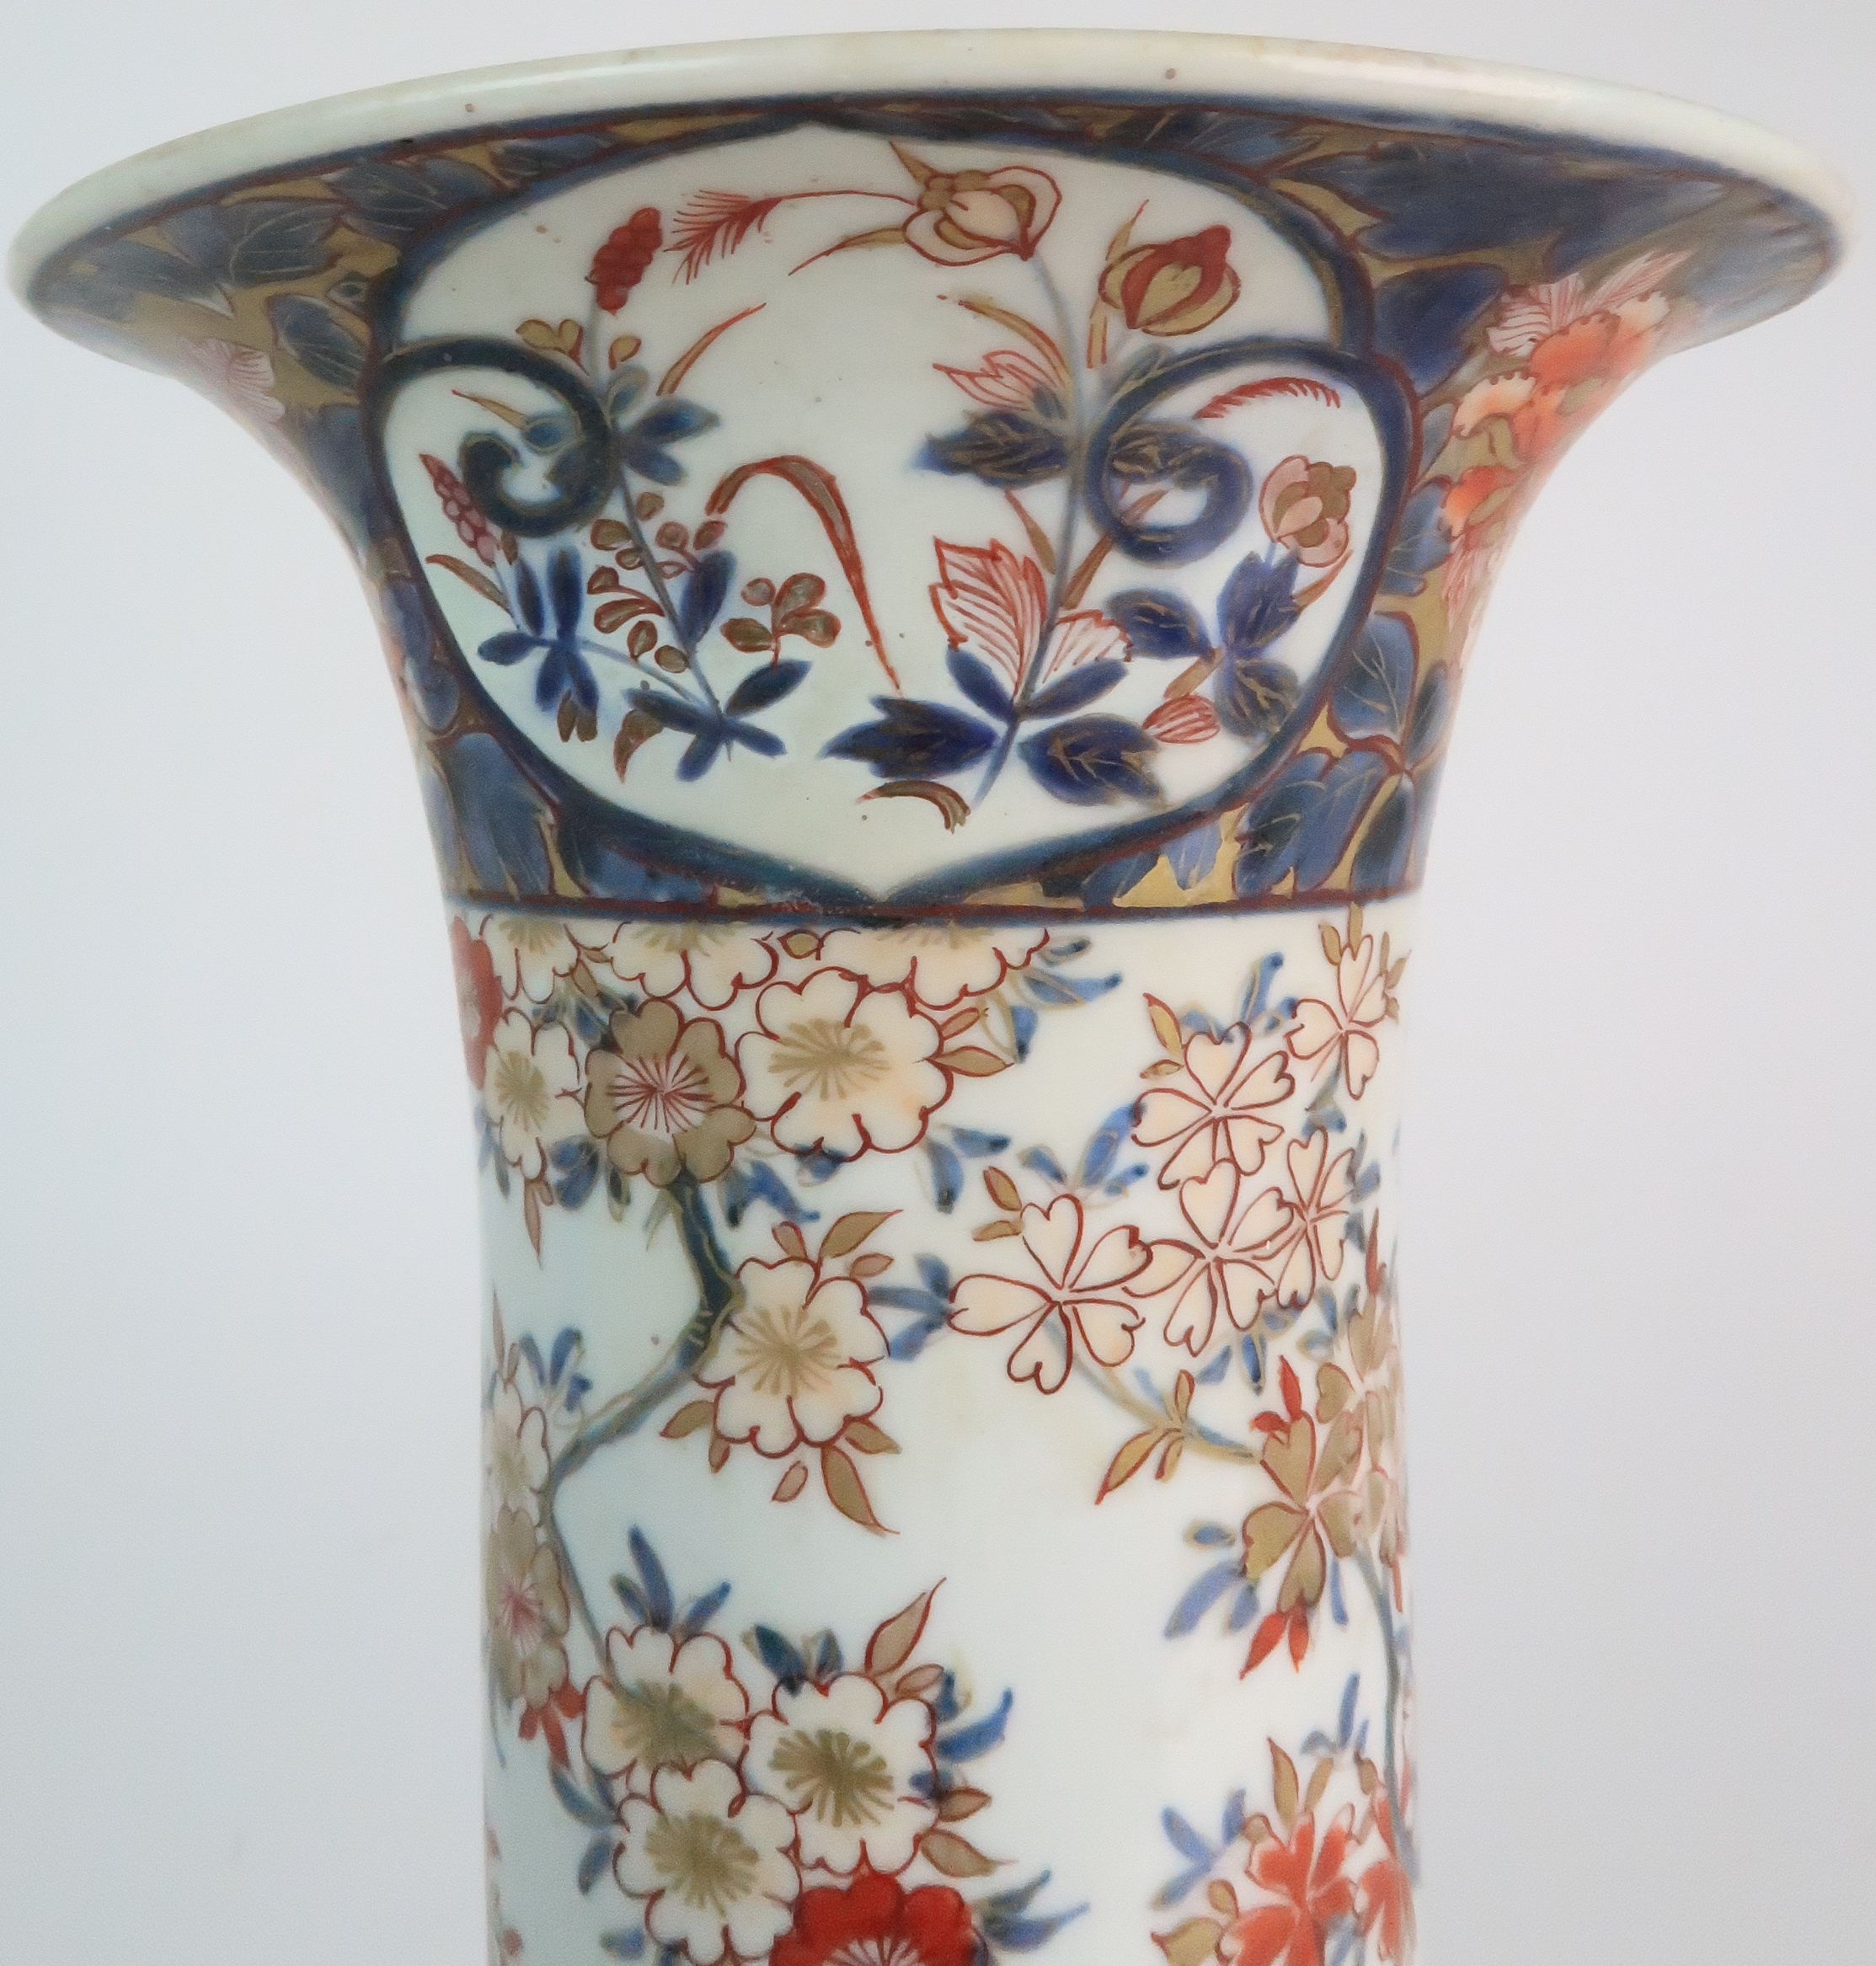 A JAPANESE IMARI FLARED CYLINDRICAL VASE painted with a building on stilts amongst flowering - Image 9 of 10